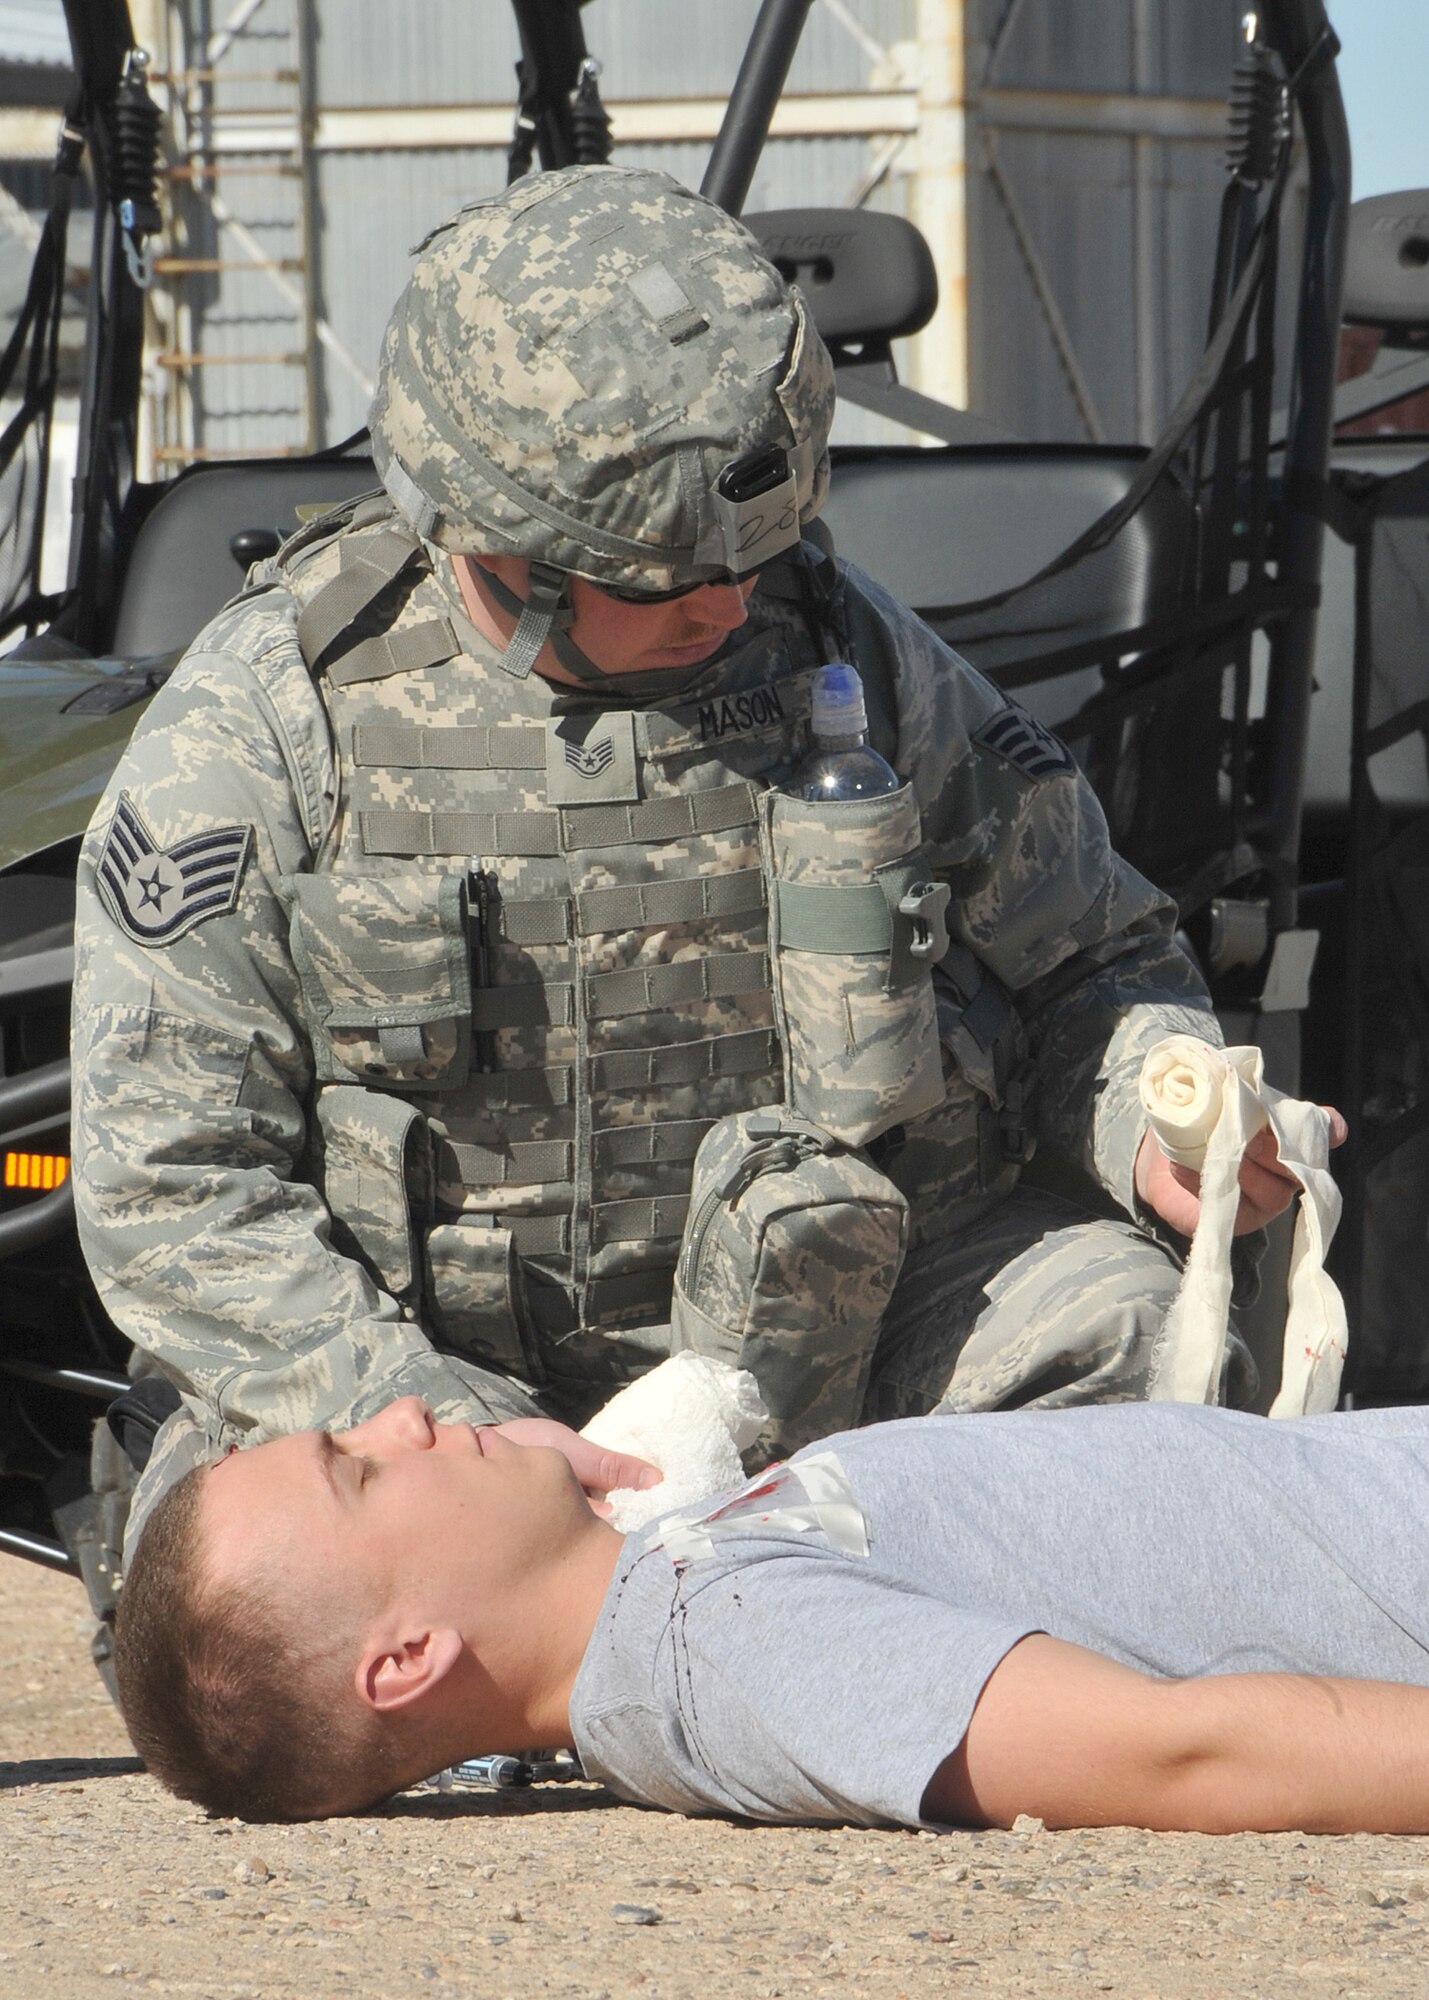 Staff Sgt. Michael Mason, 377th Security Forces Squadron, conducts first-aid on Airman 1st Class  Carl Schnieder, 377th Medical Group, as part of an exercise at Coyote Canyon.  U.S. Air Force Photo by Todd Berenger.